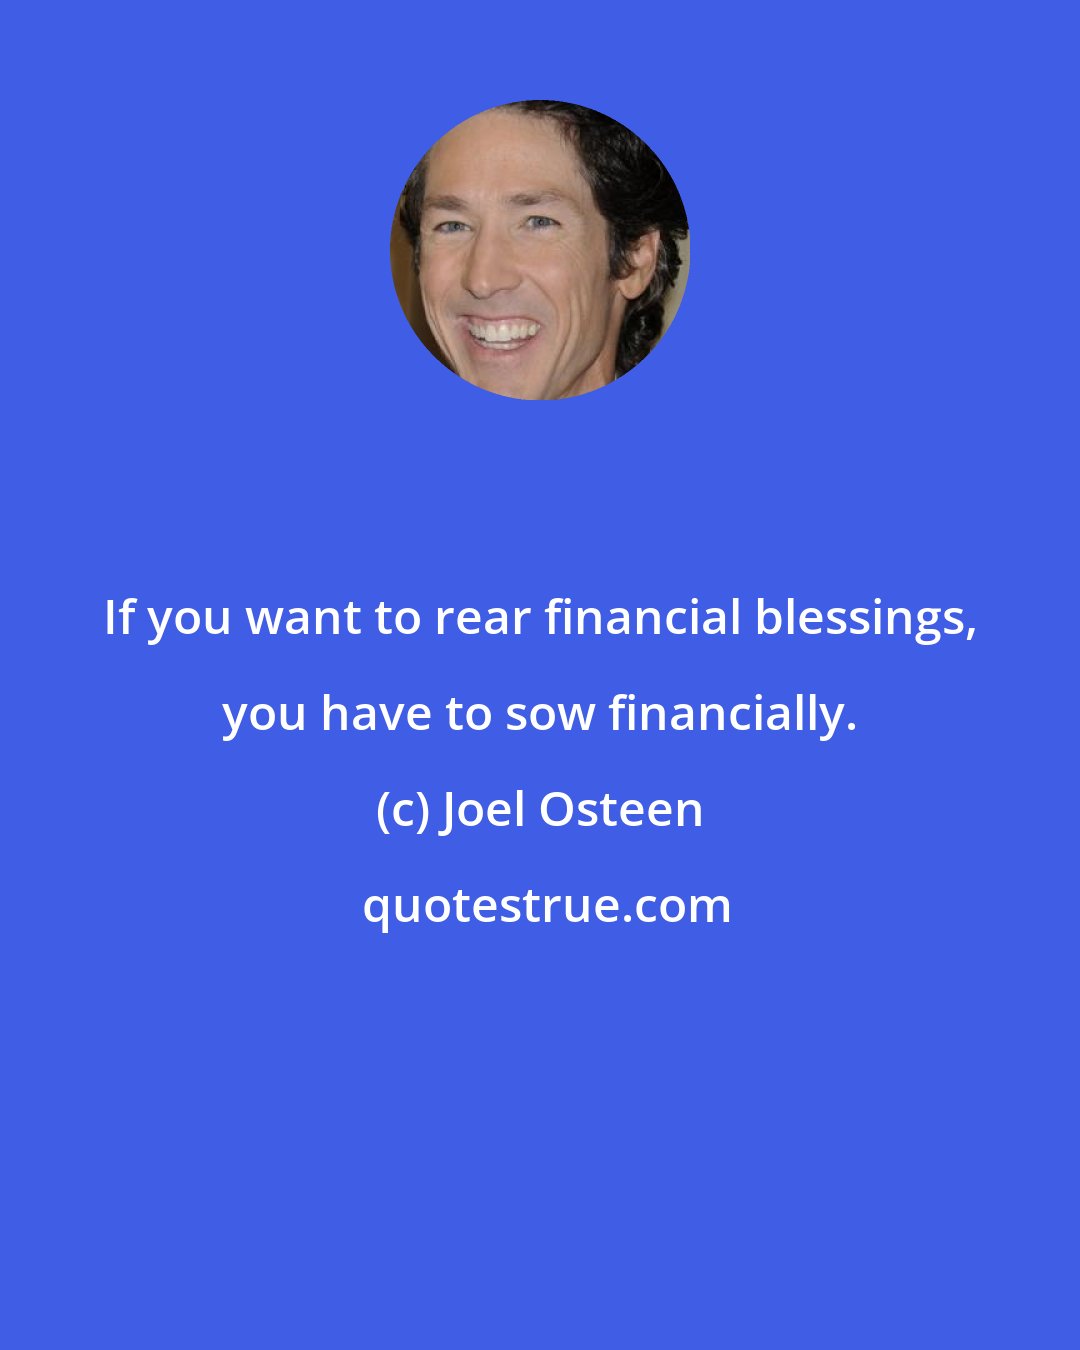 Joel Osteen: If you want to rear financial blessings, you have to sow financially.